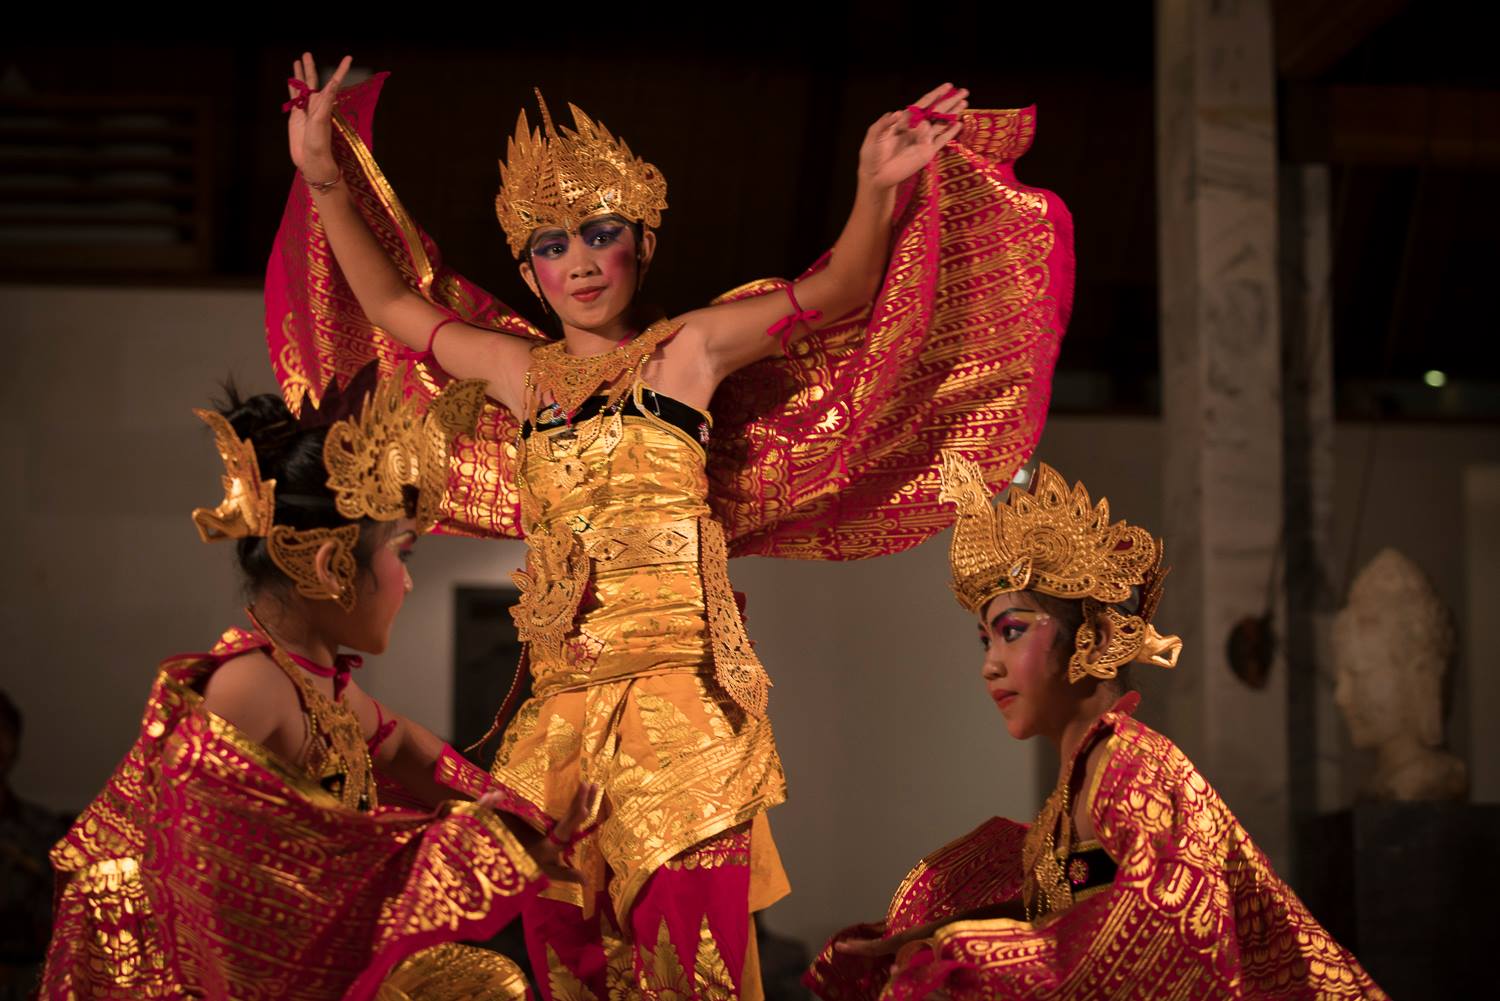 Traditional Balinese dancer in yellow and red costume